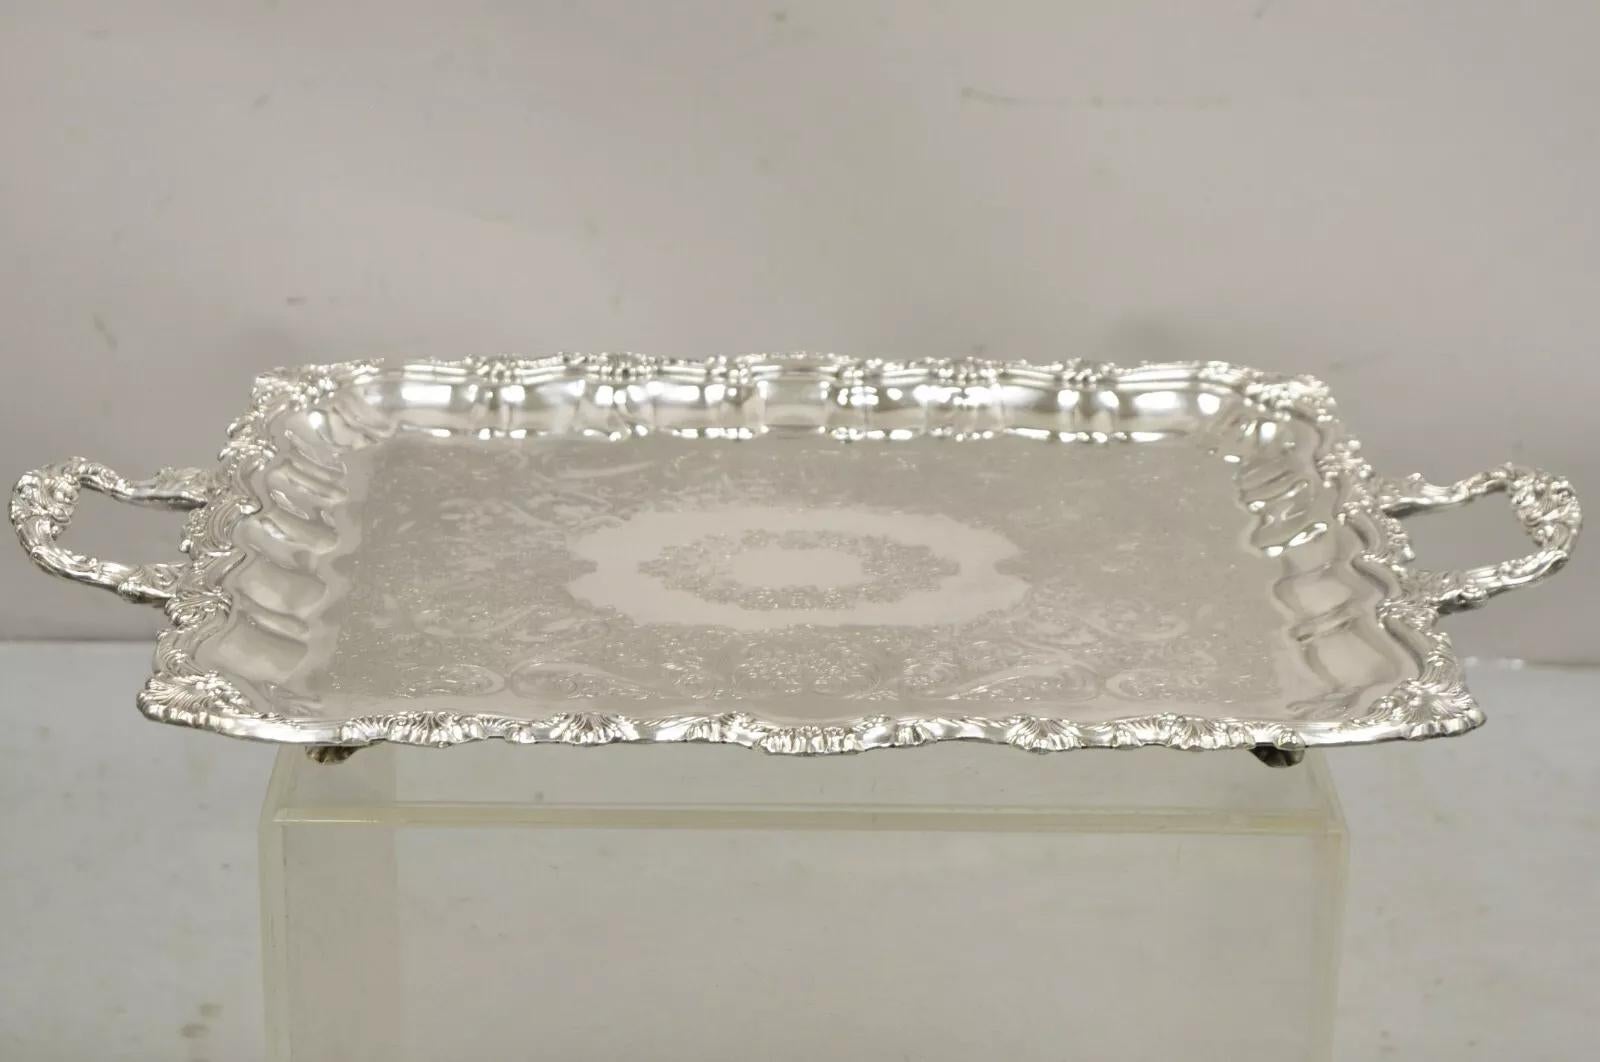 Sheridan Taunton EP Brass Silver Plated Victorian Rectangle Serving Platter Tray. Item features ornate engravings throughout, scalloped rectangular form, original hallmark. Circa Mid 20th Century. Measurements:  2